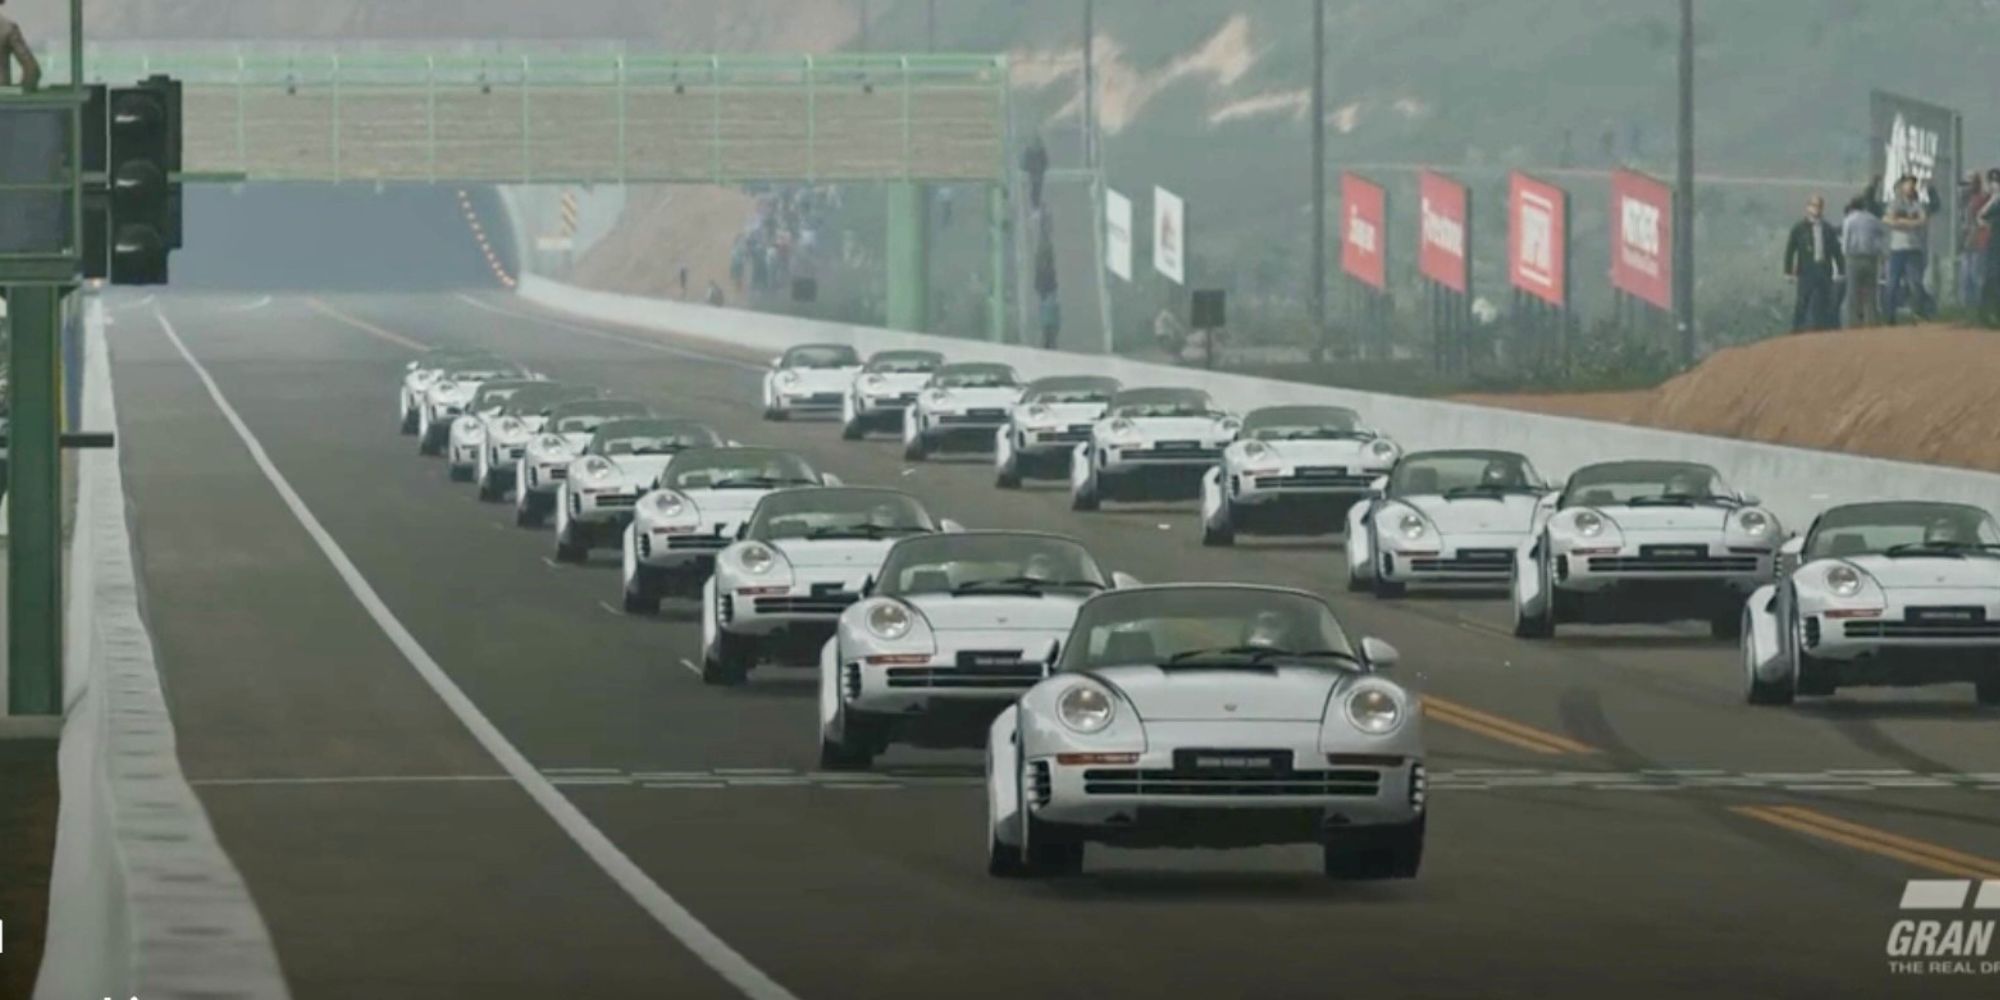 Gran Turismo 7 image showing many Porsche cars lined up on the grid doing wheelies 